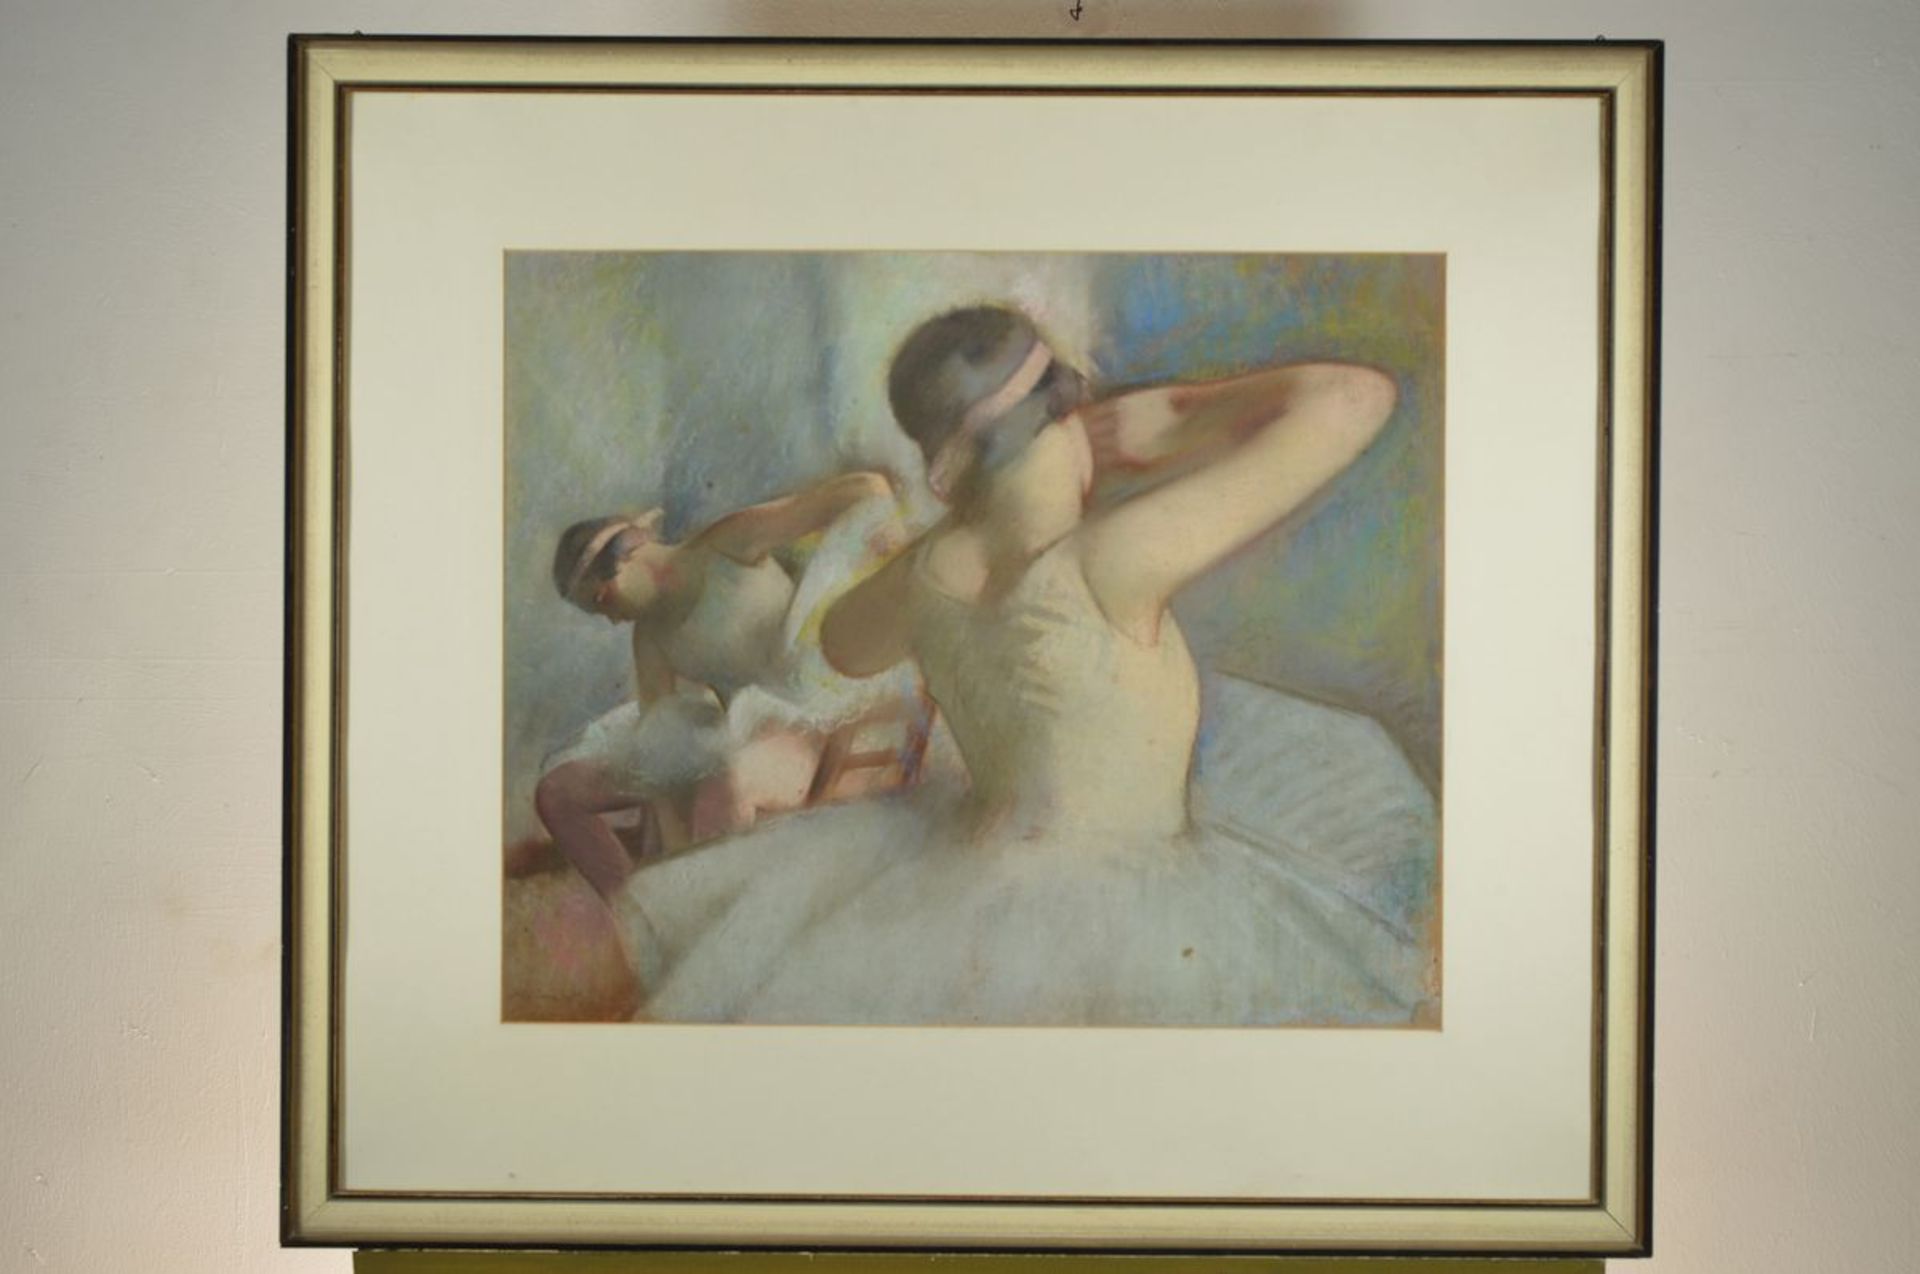 Karl Stohner, 1894 Mannheim-1957 Paris, Studies at the academy Karlsruhe, founded the free academy - Image 3 of 3